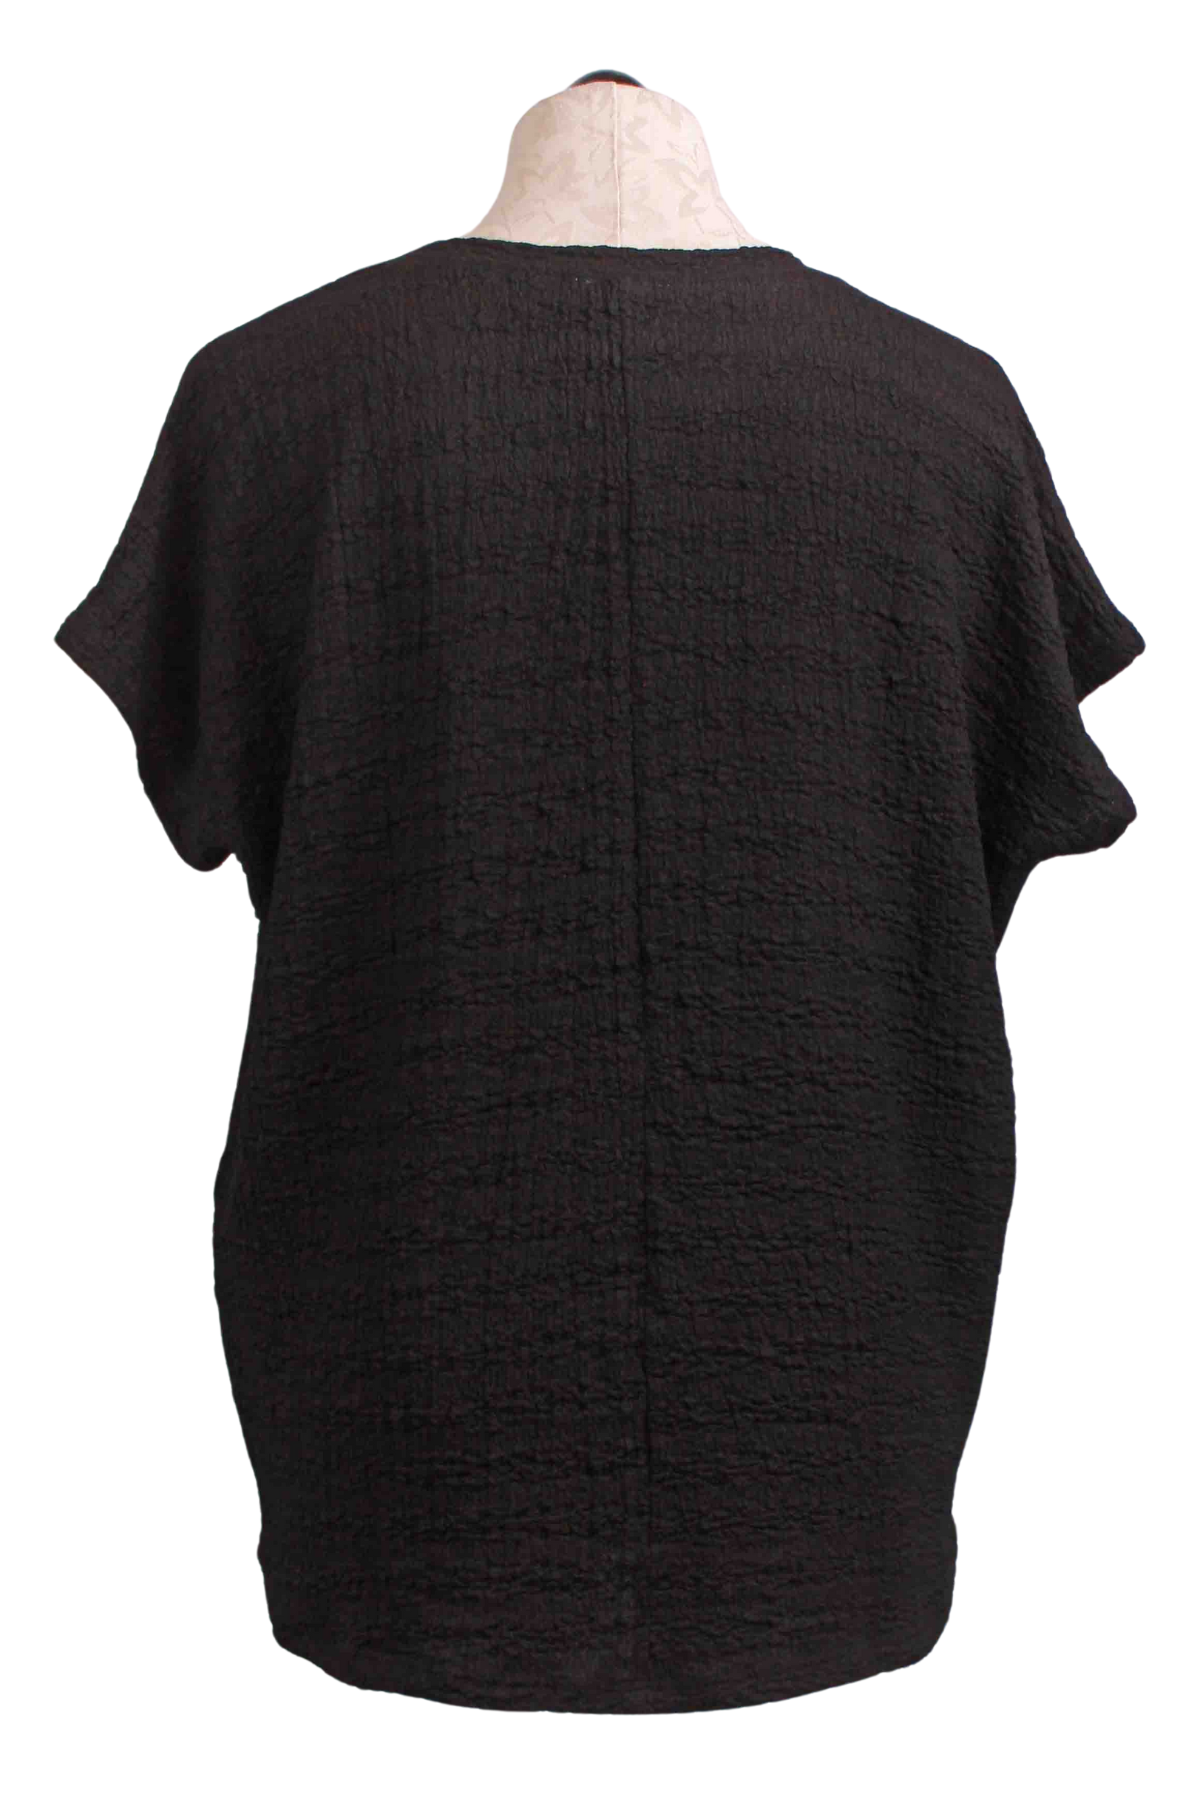 back view of black Short Sleeve V Neck Waffle Fabric Top by Inoah